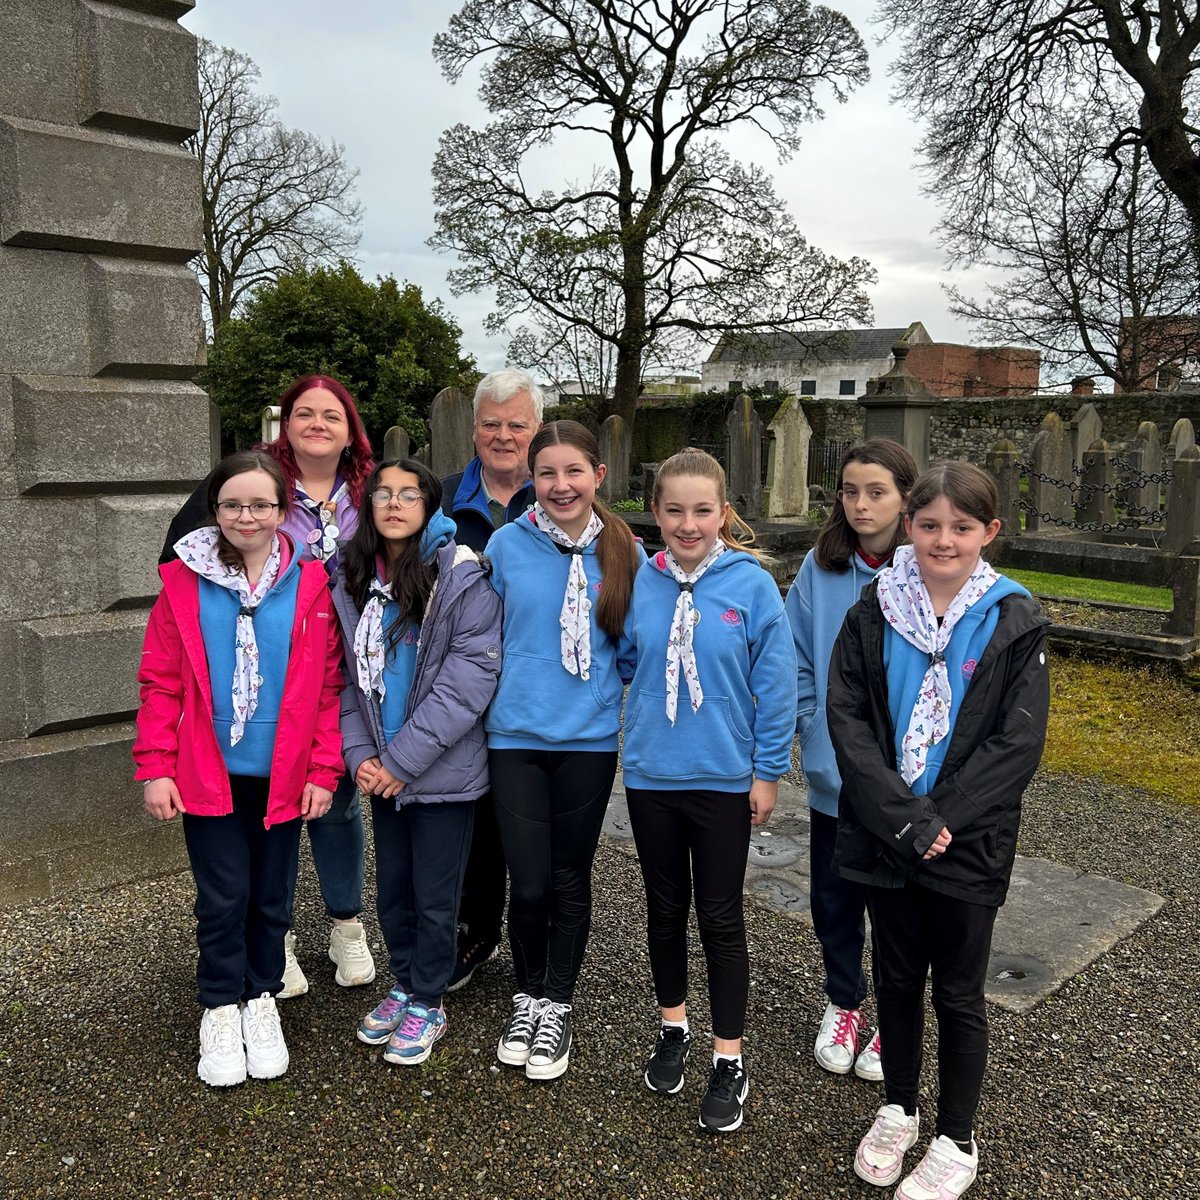 🔔 Last week, Millmount Girl Guides got a unique experience as they joined local church bell ringers! 🎶 Learning about traditions and even getting a chance to ring the bells themselves - what an unforgettable experience! #IrishGirlGuides #GivingGirlsConfidence #communitywork